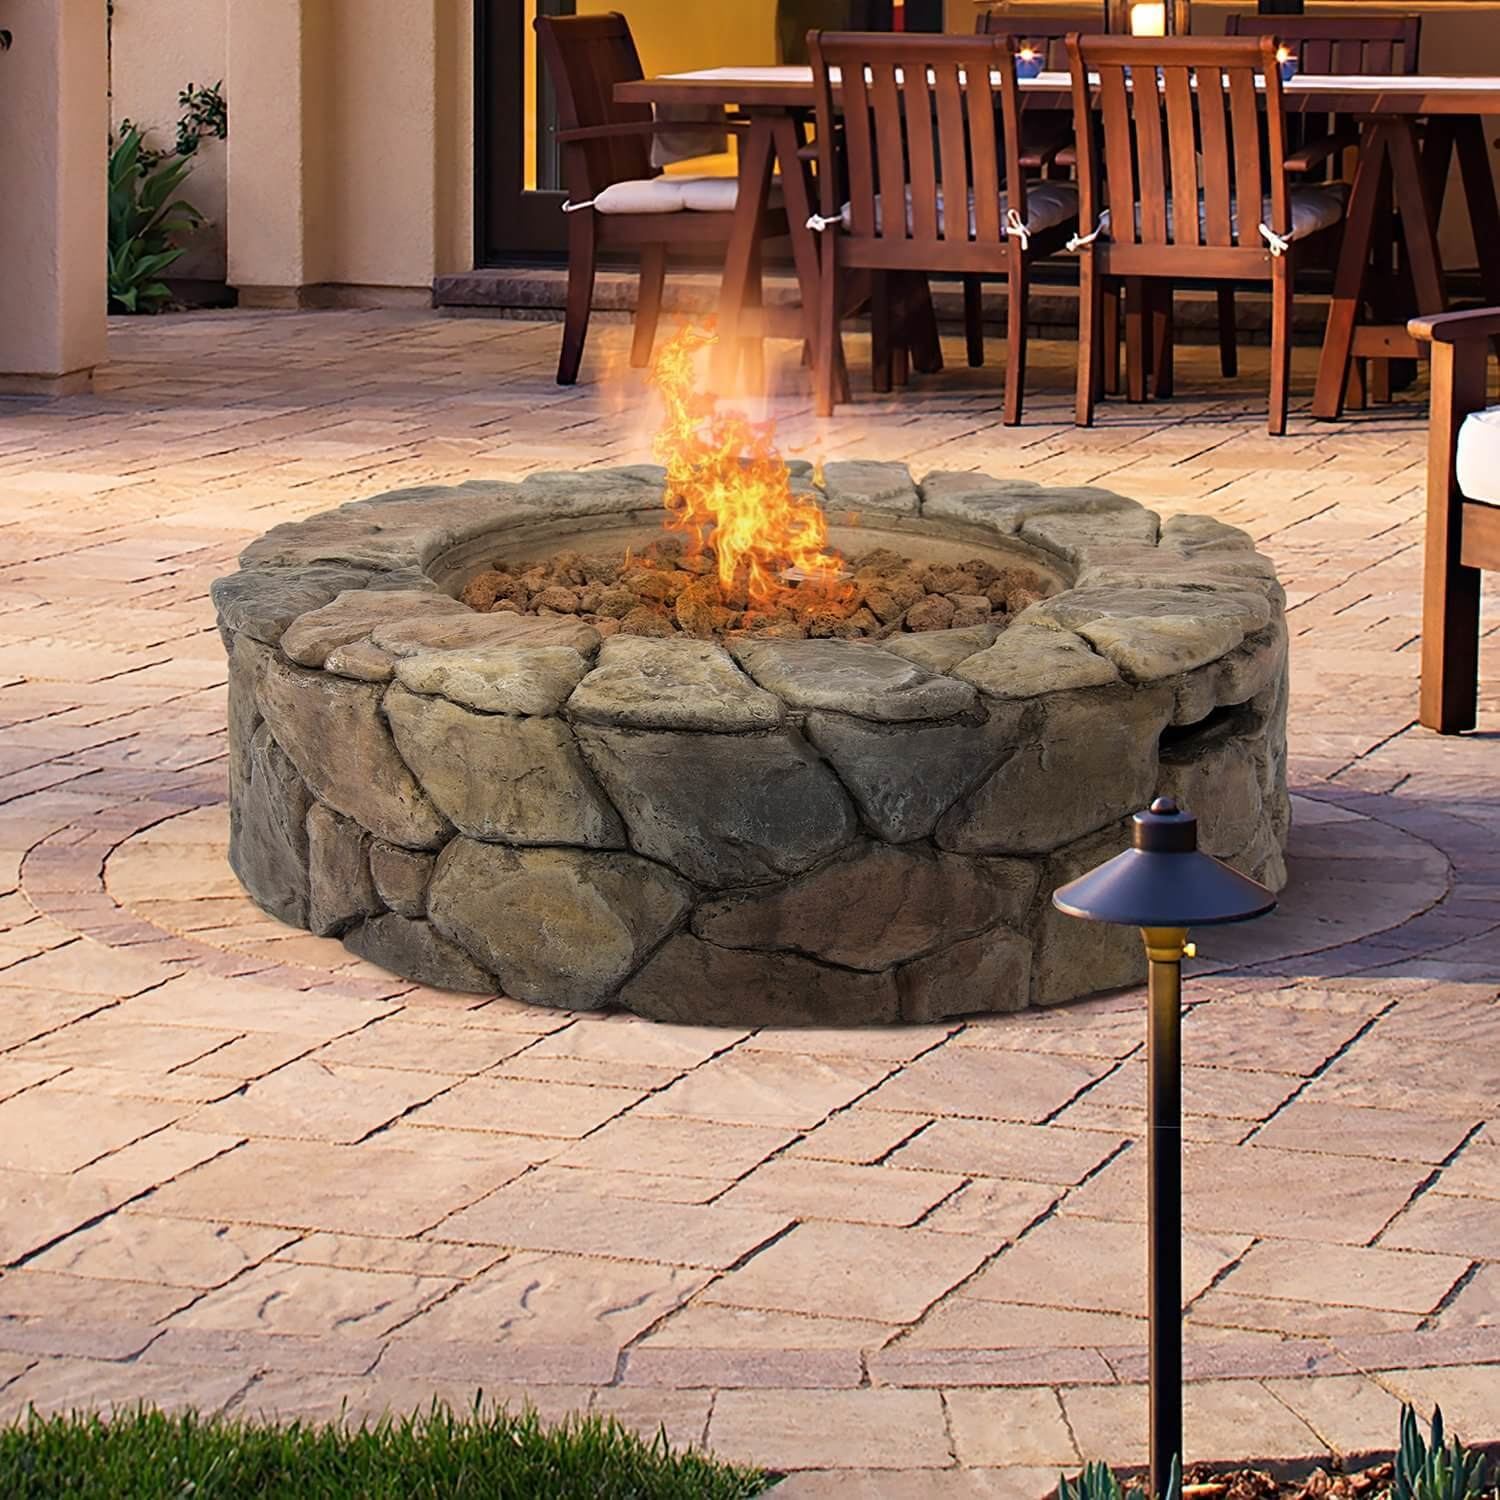 More ideas below: DIY Square Round cinder block fire pit How To Make Ideas  Simple Easy Backyards cinder block fire pit grill Small Painted cinder  block fire